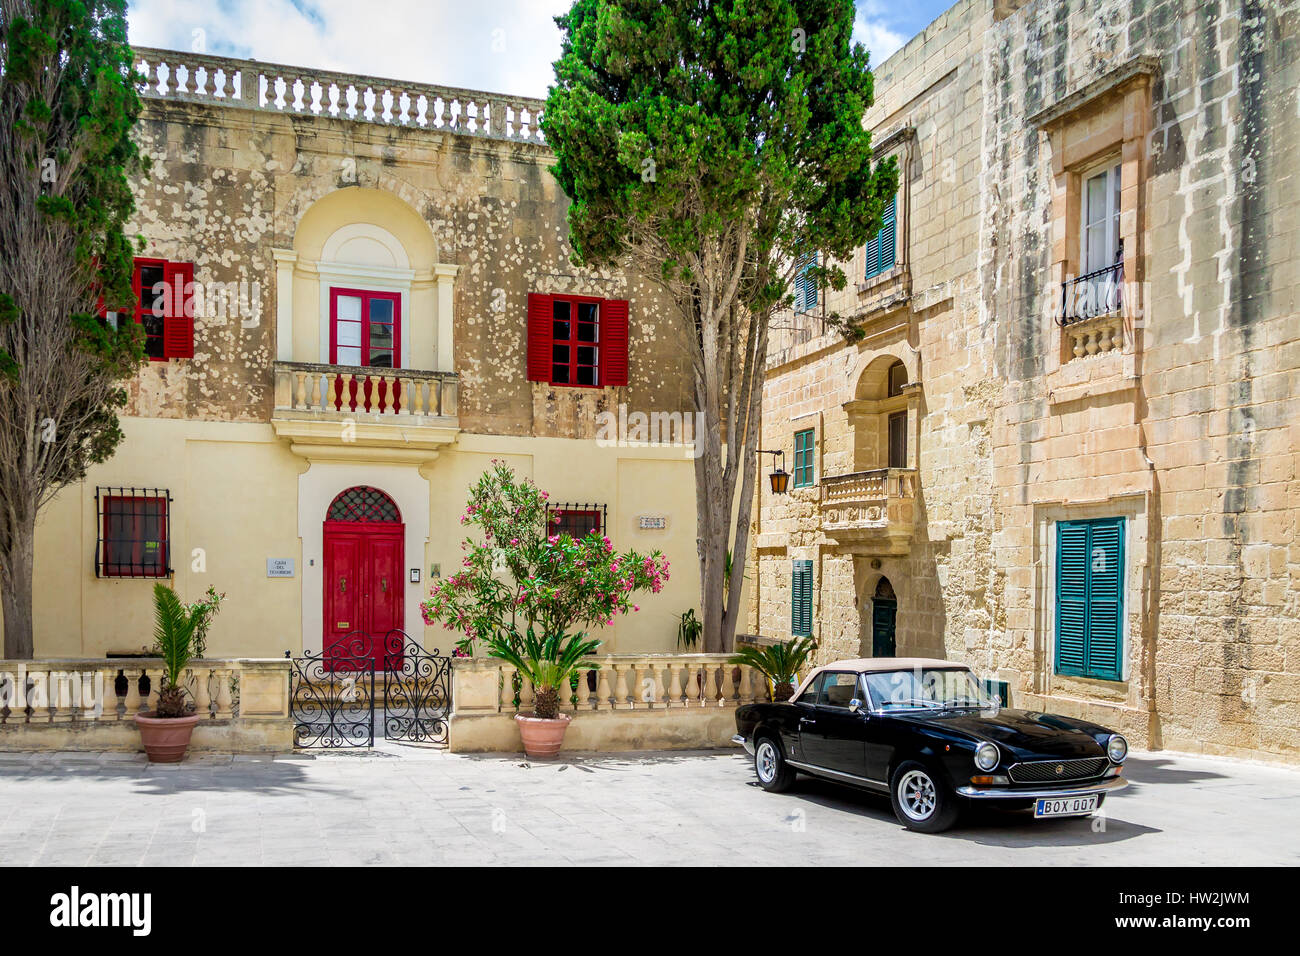 Old stone house with colorful windows and black classic style convertible car - Mdina, Malta Stock Photo